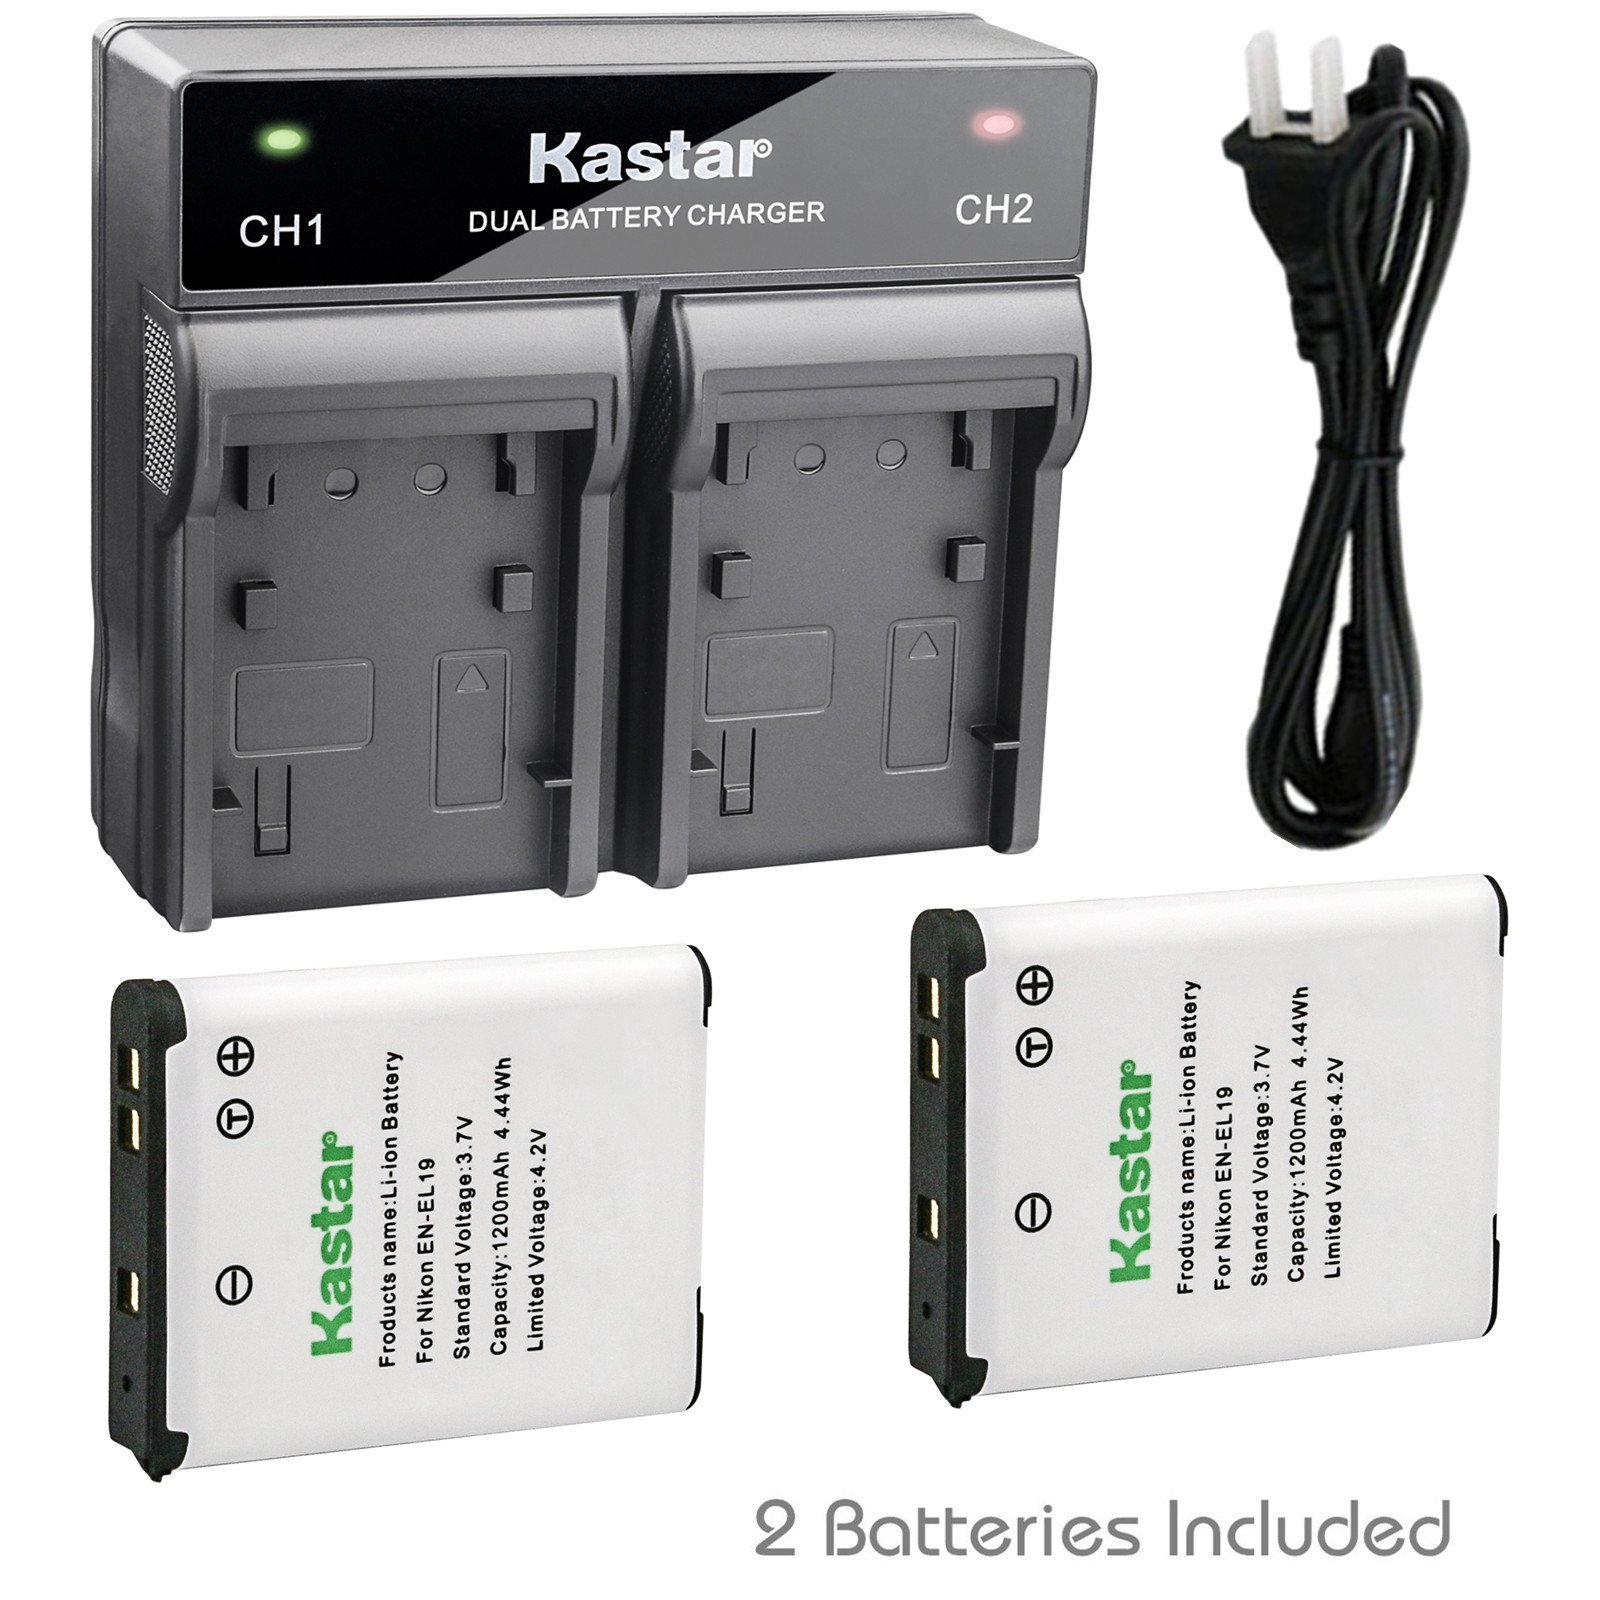 Mua Kastar 2X Battery + Fast Dual Charger for Nikon EN-EL19, Sony NP-BJ1  and Nikon Coolpix S32 S33 A100 A300 W100 S100 S2500 S4200 S5200 S5300 S6400  S6500 S6600 S6700 S6800 S6900